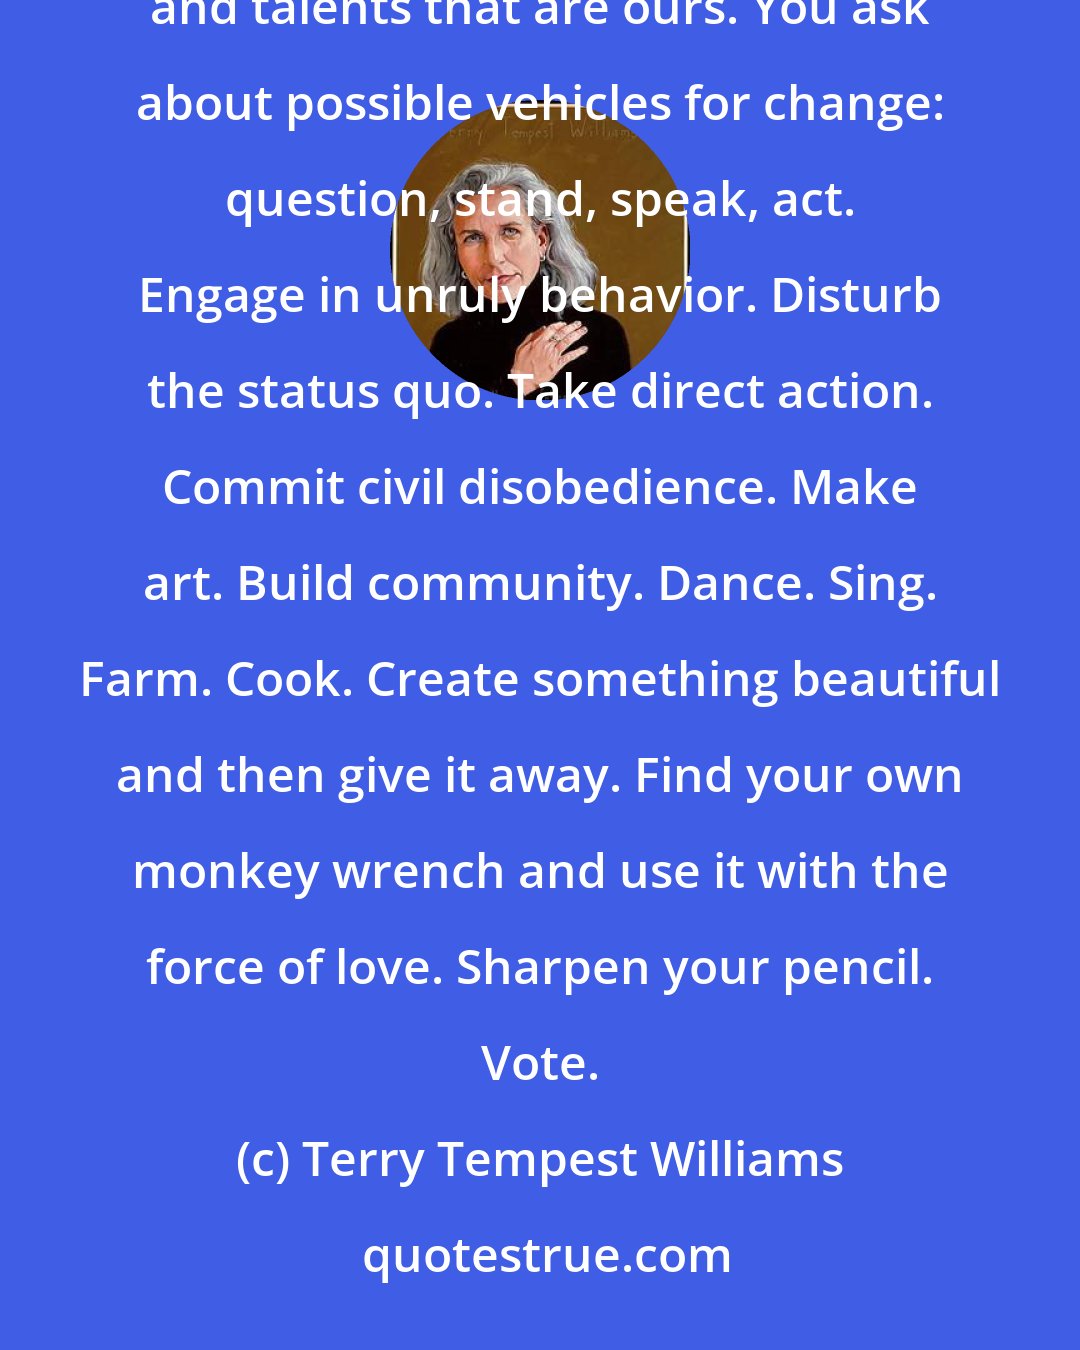 Terry Tempest Williams: Each of us contributes our own piece to the whole, each in our own way, each in our own time with the gifts and talents that are ours. You ask about possible vehicles for change: question, stand, speak, act. Engage in unruly behavior. Disturb the status quo. Take direct action. Commit civil disobedience. Make art. Build community. Dance. Sing. Farm. Cook. Create something beautiful and then give it away. Find your own monkey wrench and use it with the force of love. Sharpen your pencil. Vote.